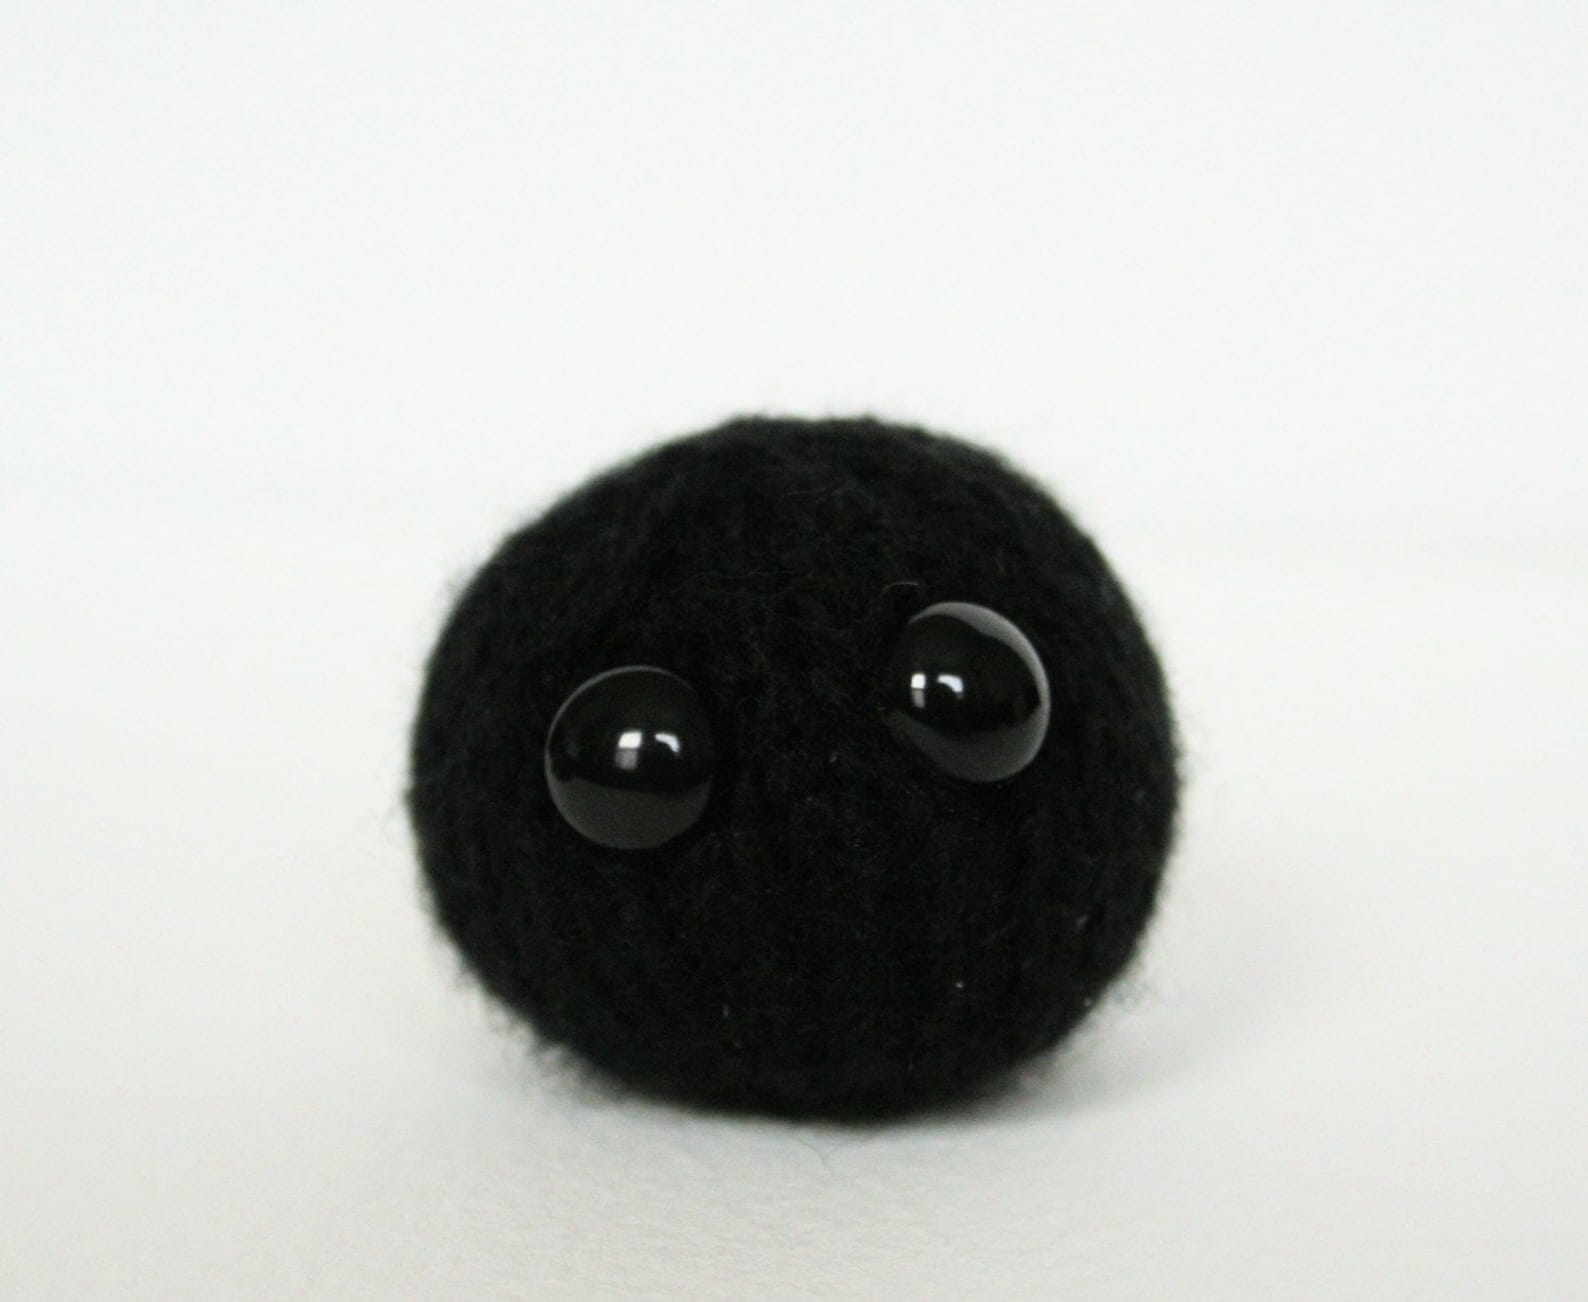 Now you can have your very own baby black hole, complete with adoption ...